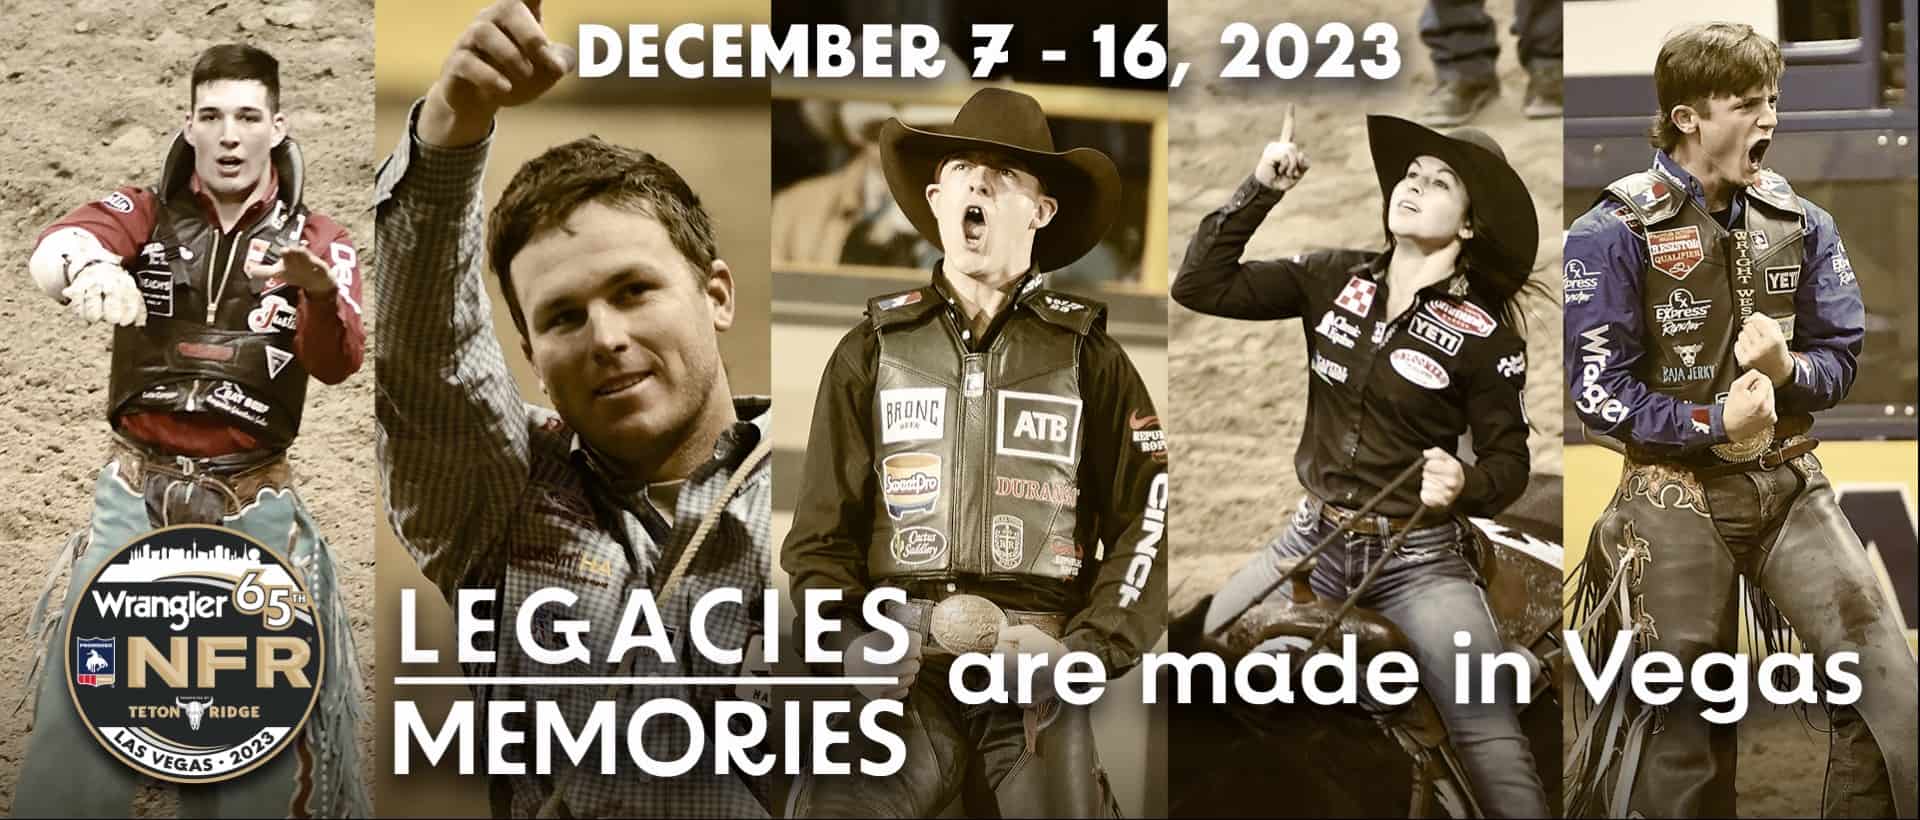 How to Watch the NFR 2023 Live and Streaming American Hat Makers